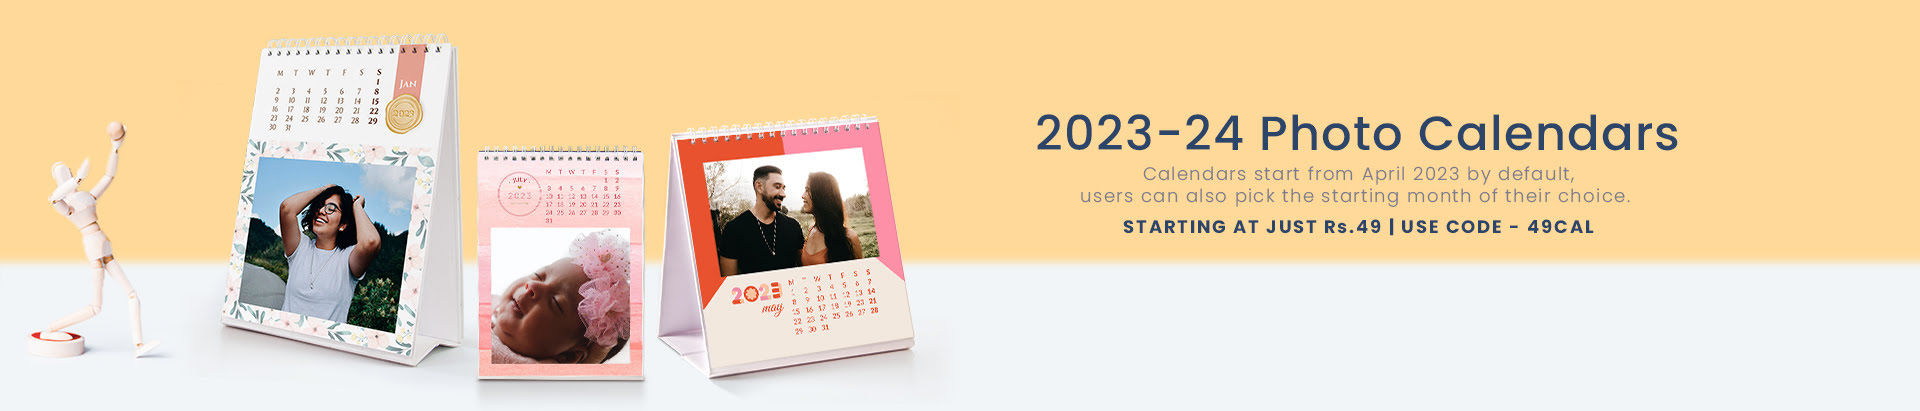 zoom in - Customized Photo Calenders Get offer Up To 30% OFF